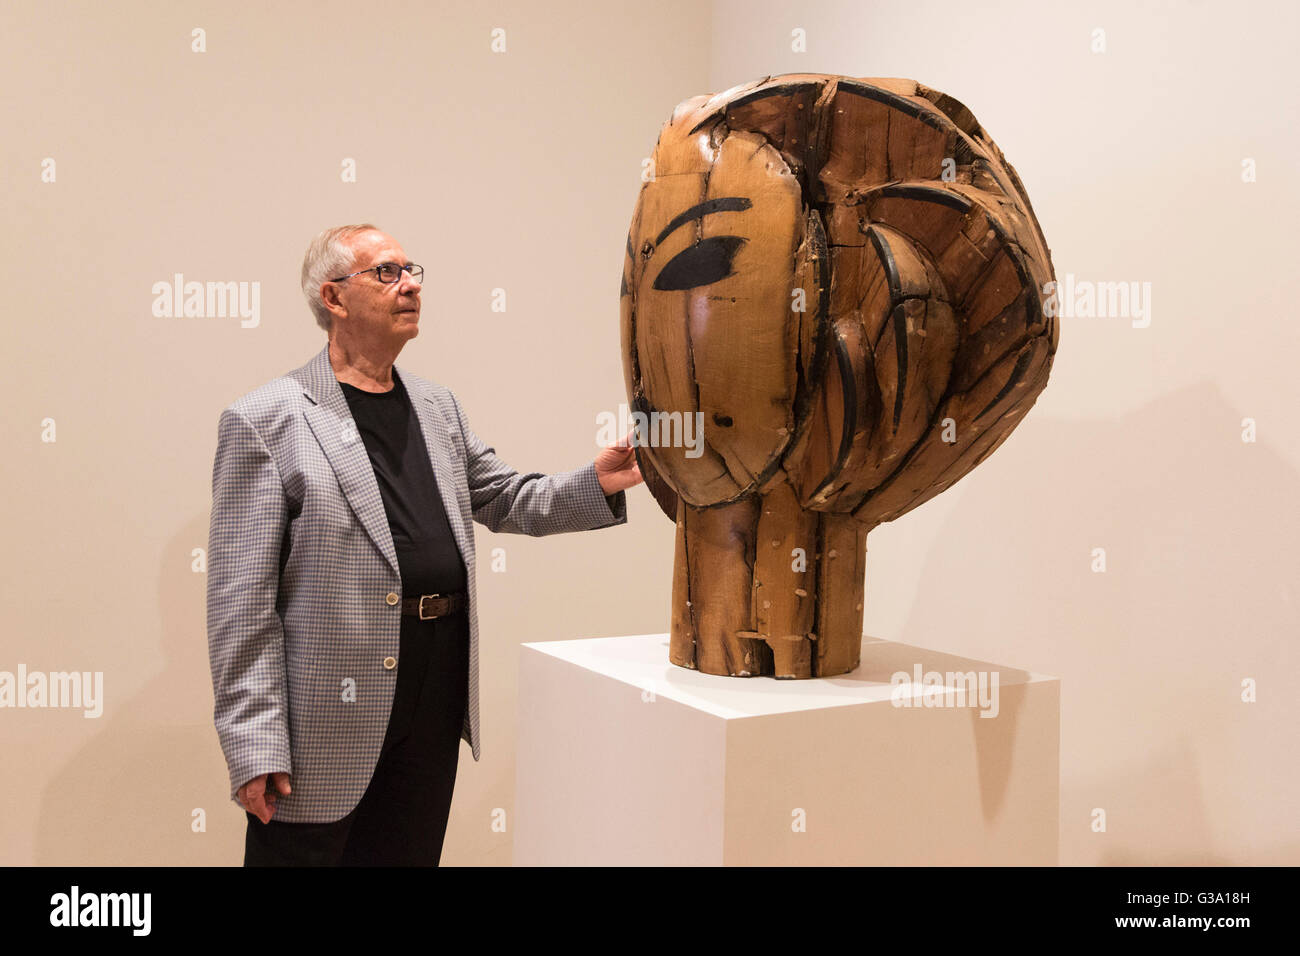 London, UK. 9 June 2016. Pictured: Spanish artist Manolo Valdes at the exhibition with his wood sculpture Head, 2016. Marlborough Fine Art present the exhibition Manolo Valdes: Recent Work, Paintings & Sculptures from 10 June to 16 July 2016. Stock Photo